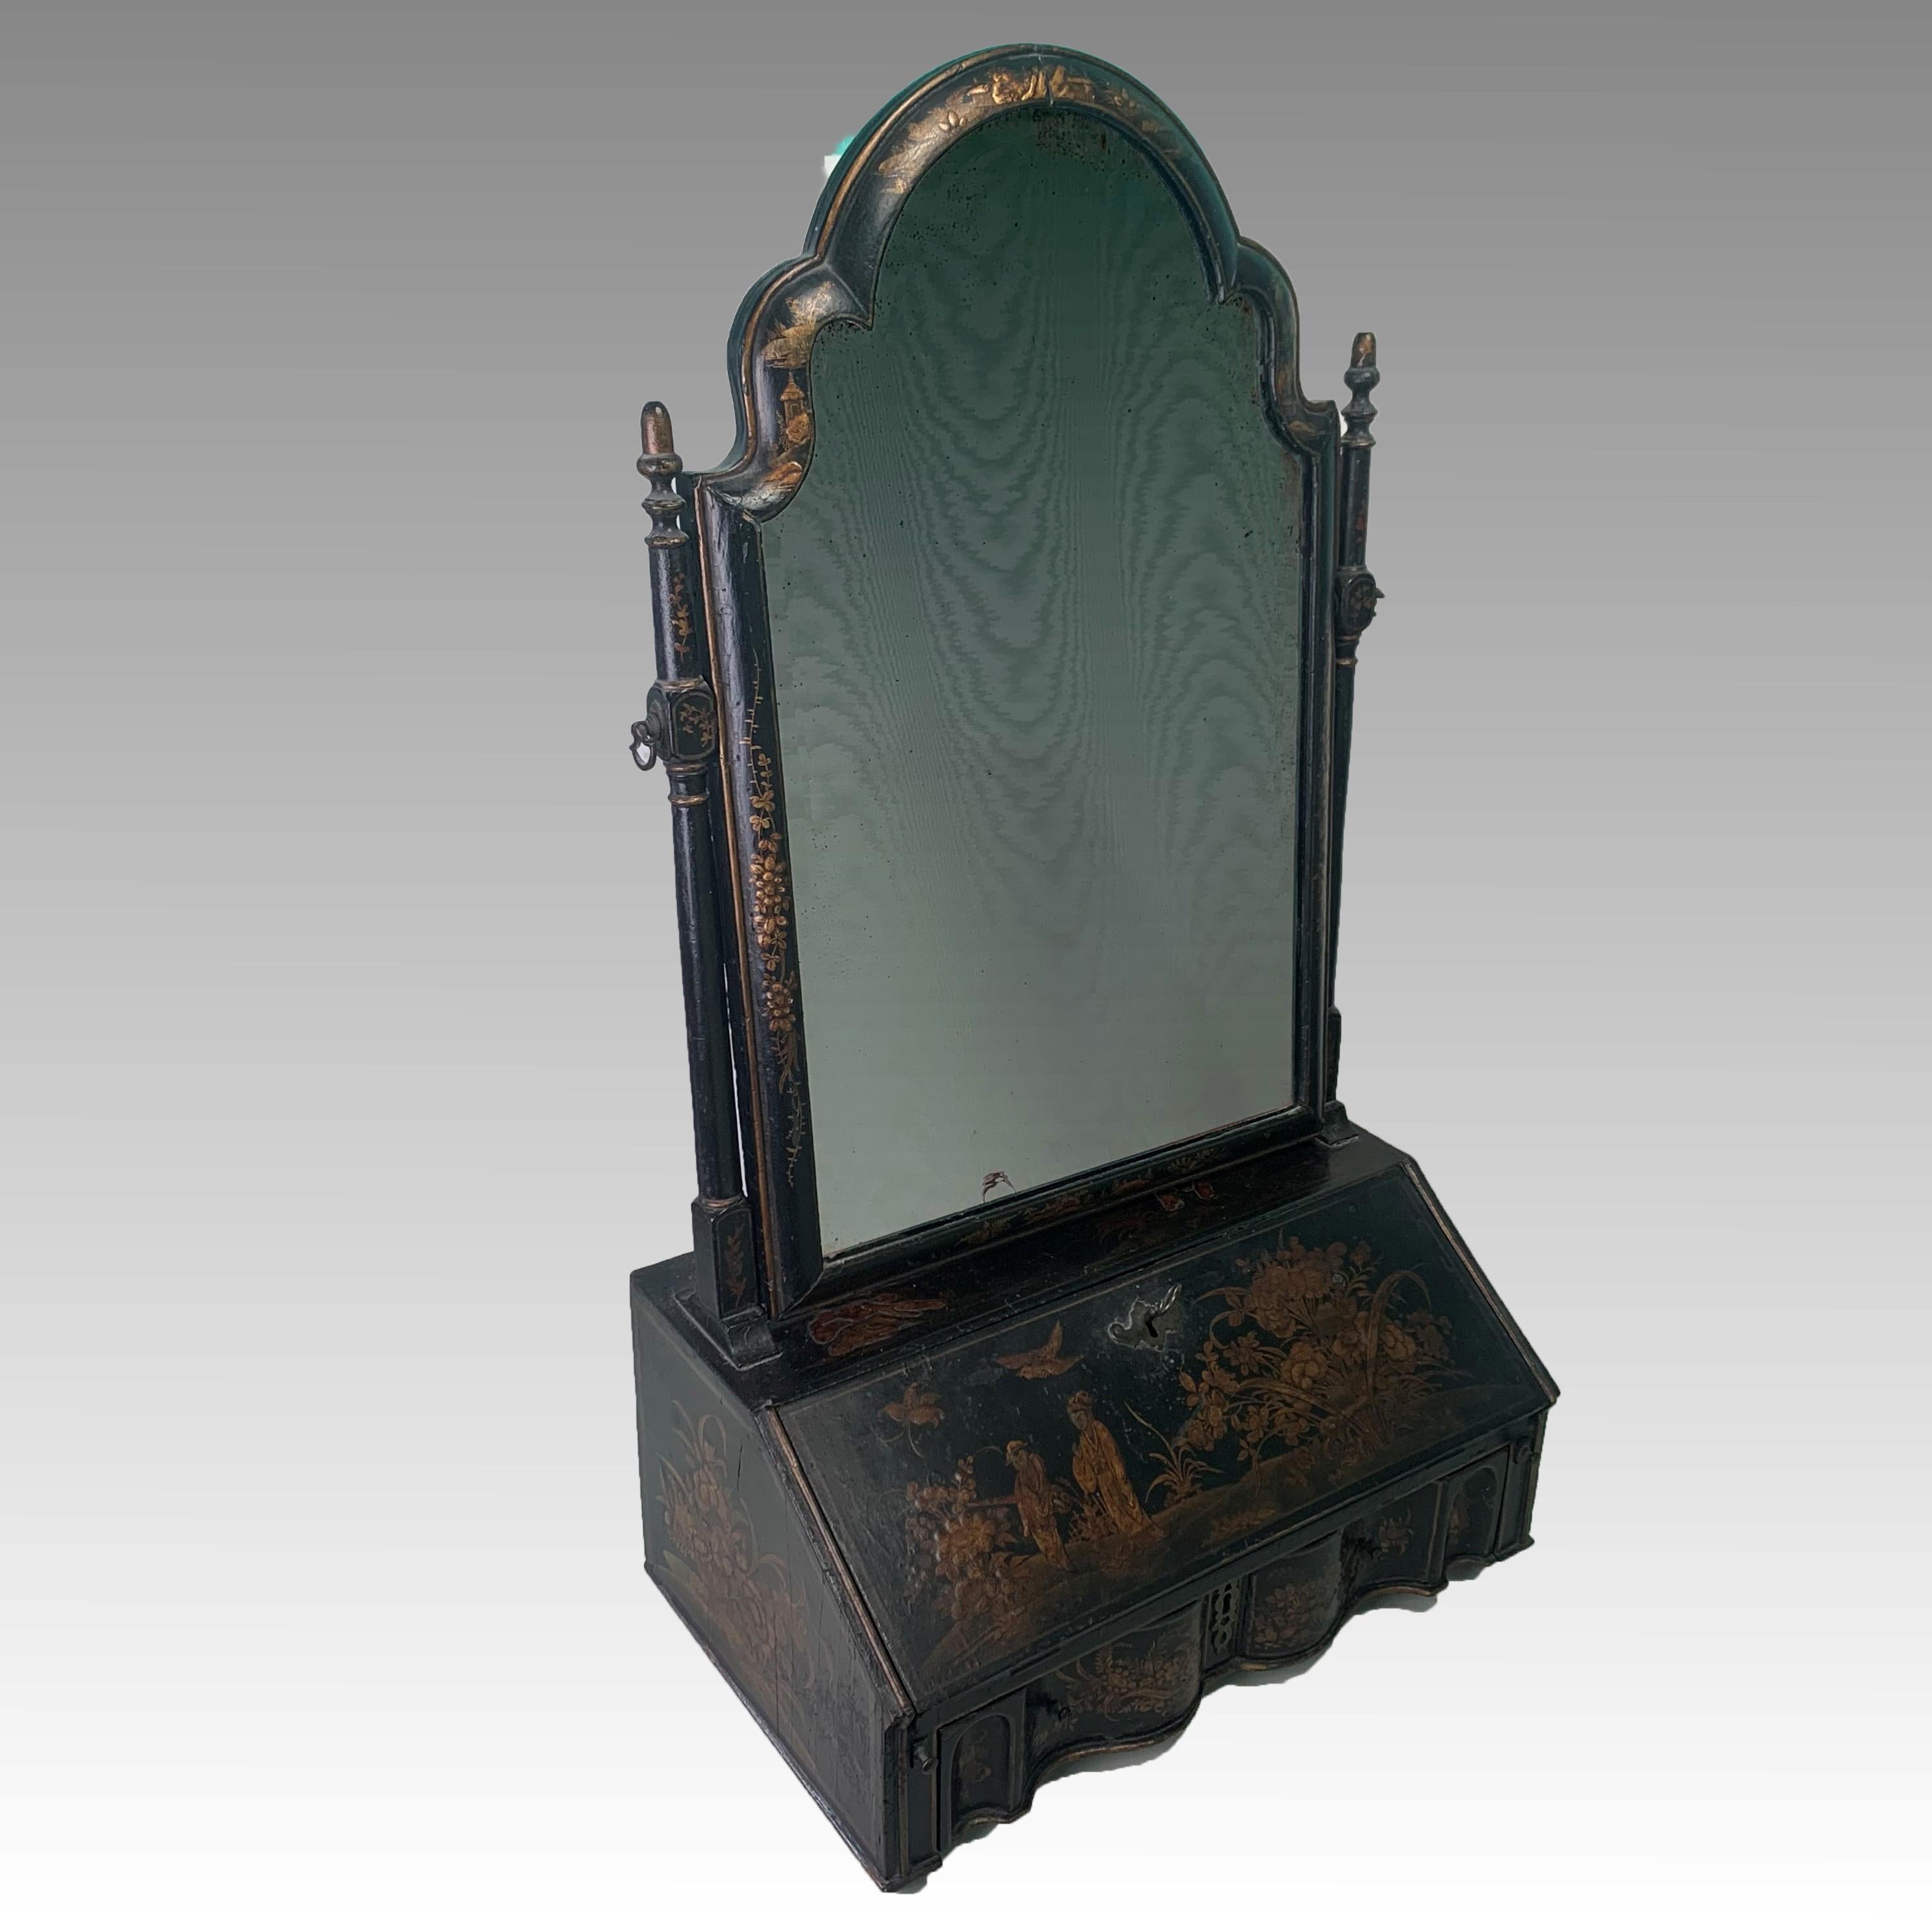 A fine and rare early 18th century Queen Anne period black Jappanned dressing table mirror witn shaped arched top above the original murcury plate with bevelled edge, supported on two turned uprights above a miniature bureau base. The fall opening